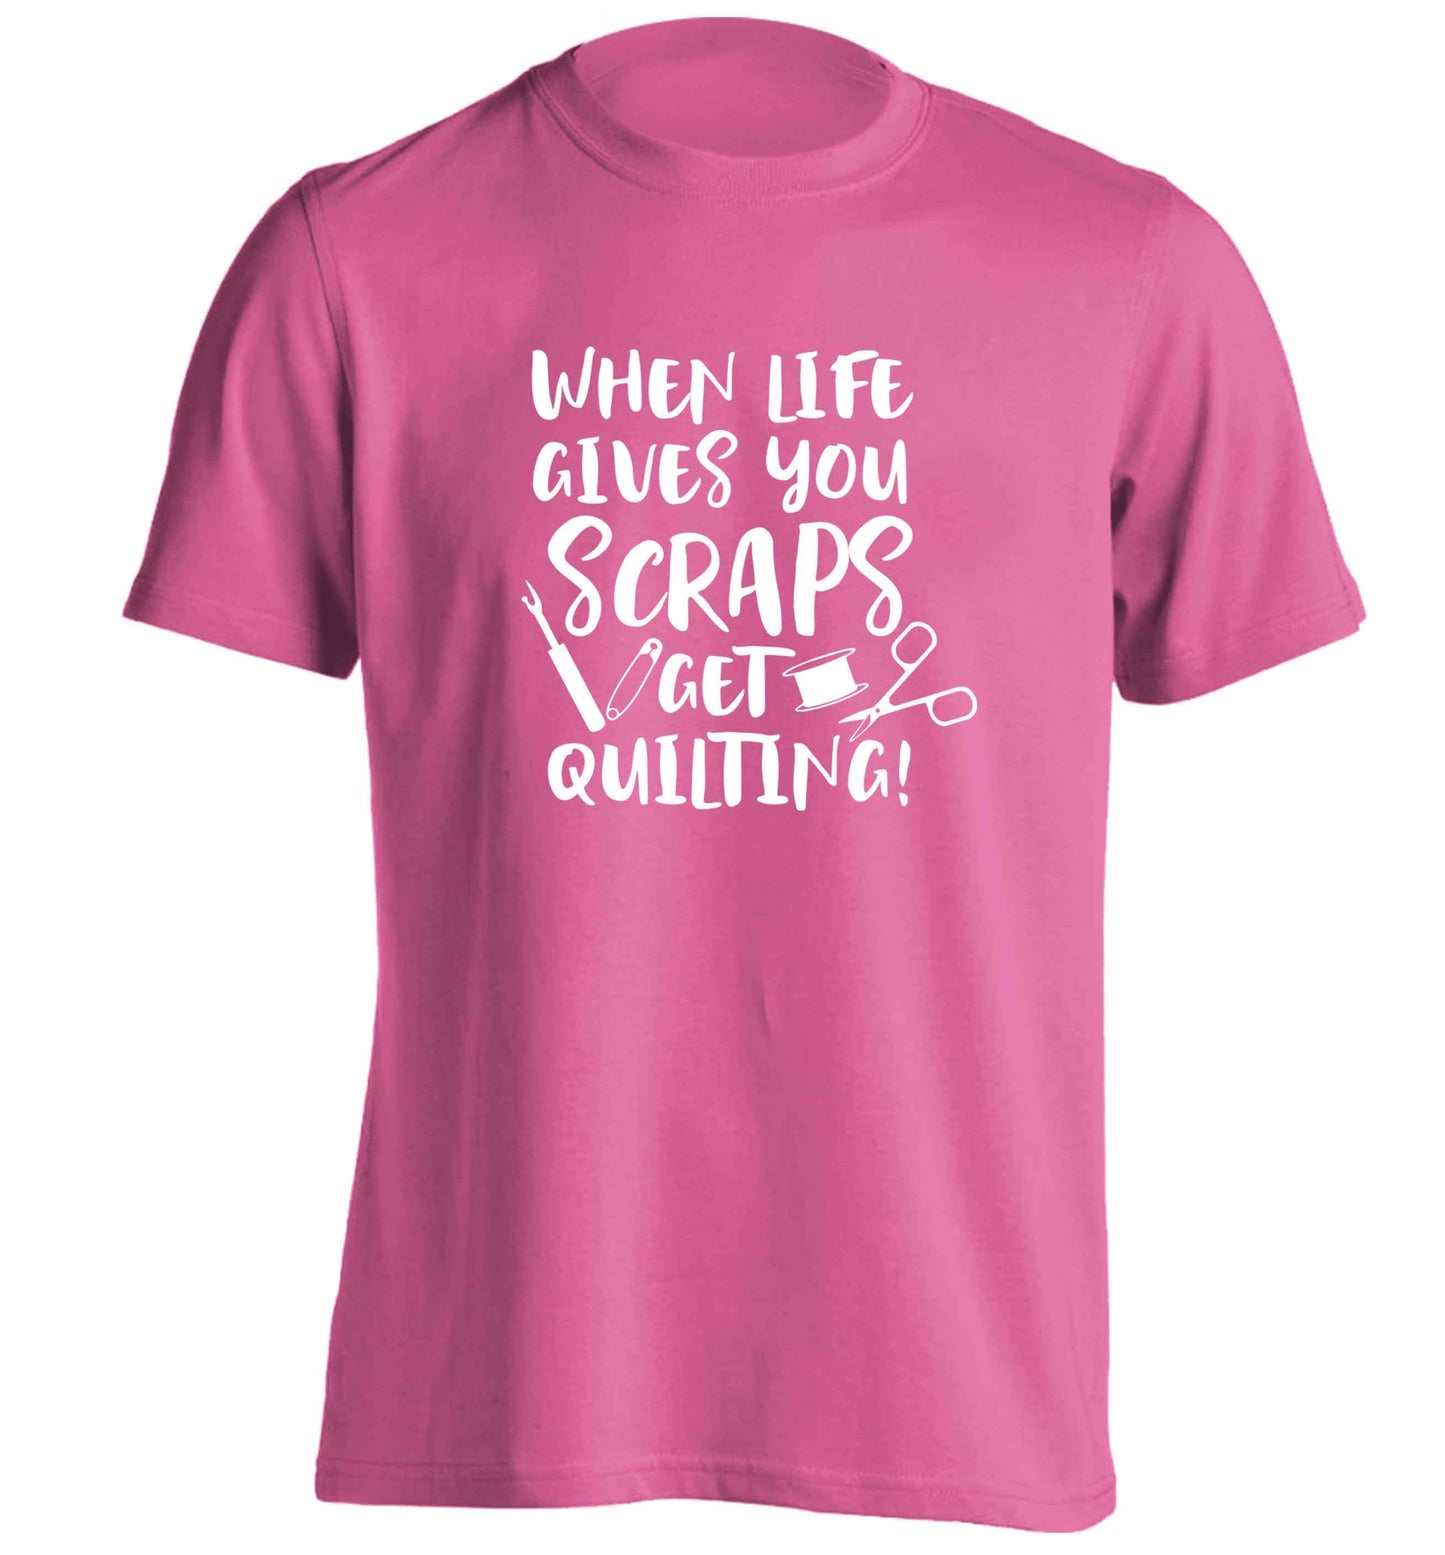 When life gives you scraps get quilting! adults unisex pink Tshirt 2XL